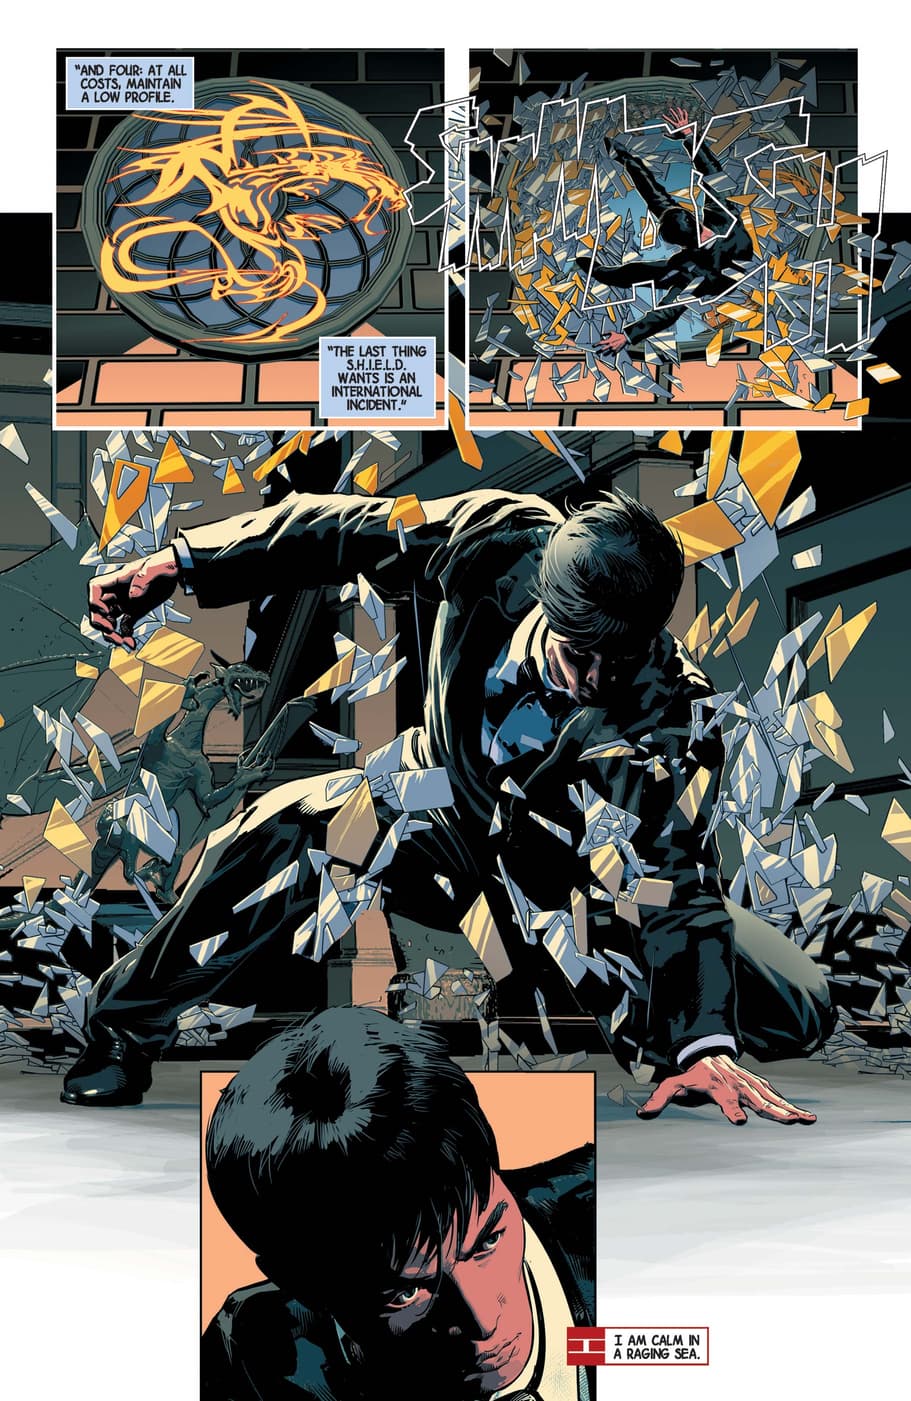 Shang-Chi in a tuxedo crashes through a glass barrier.